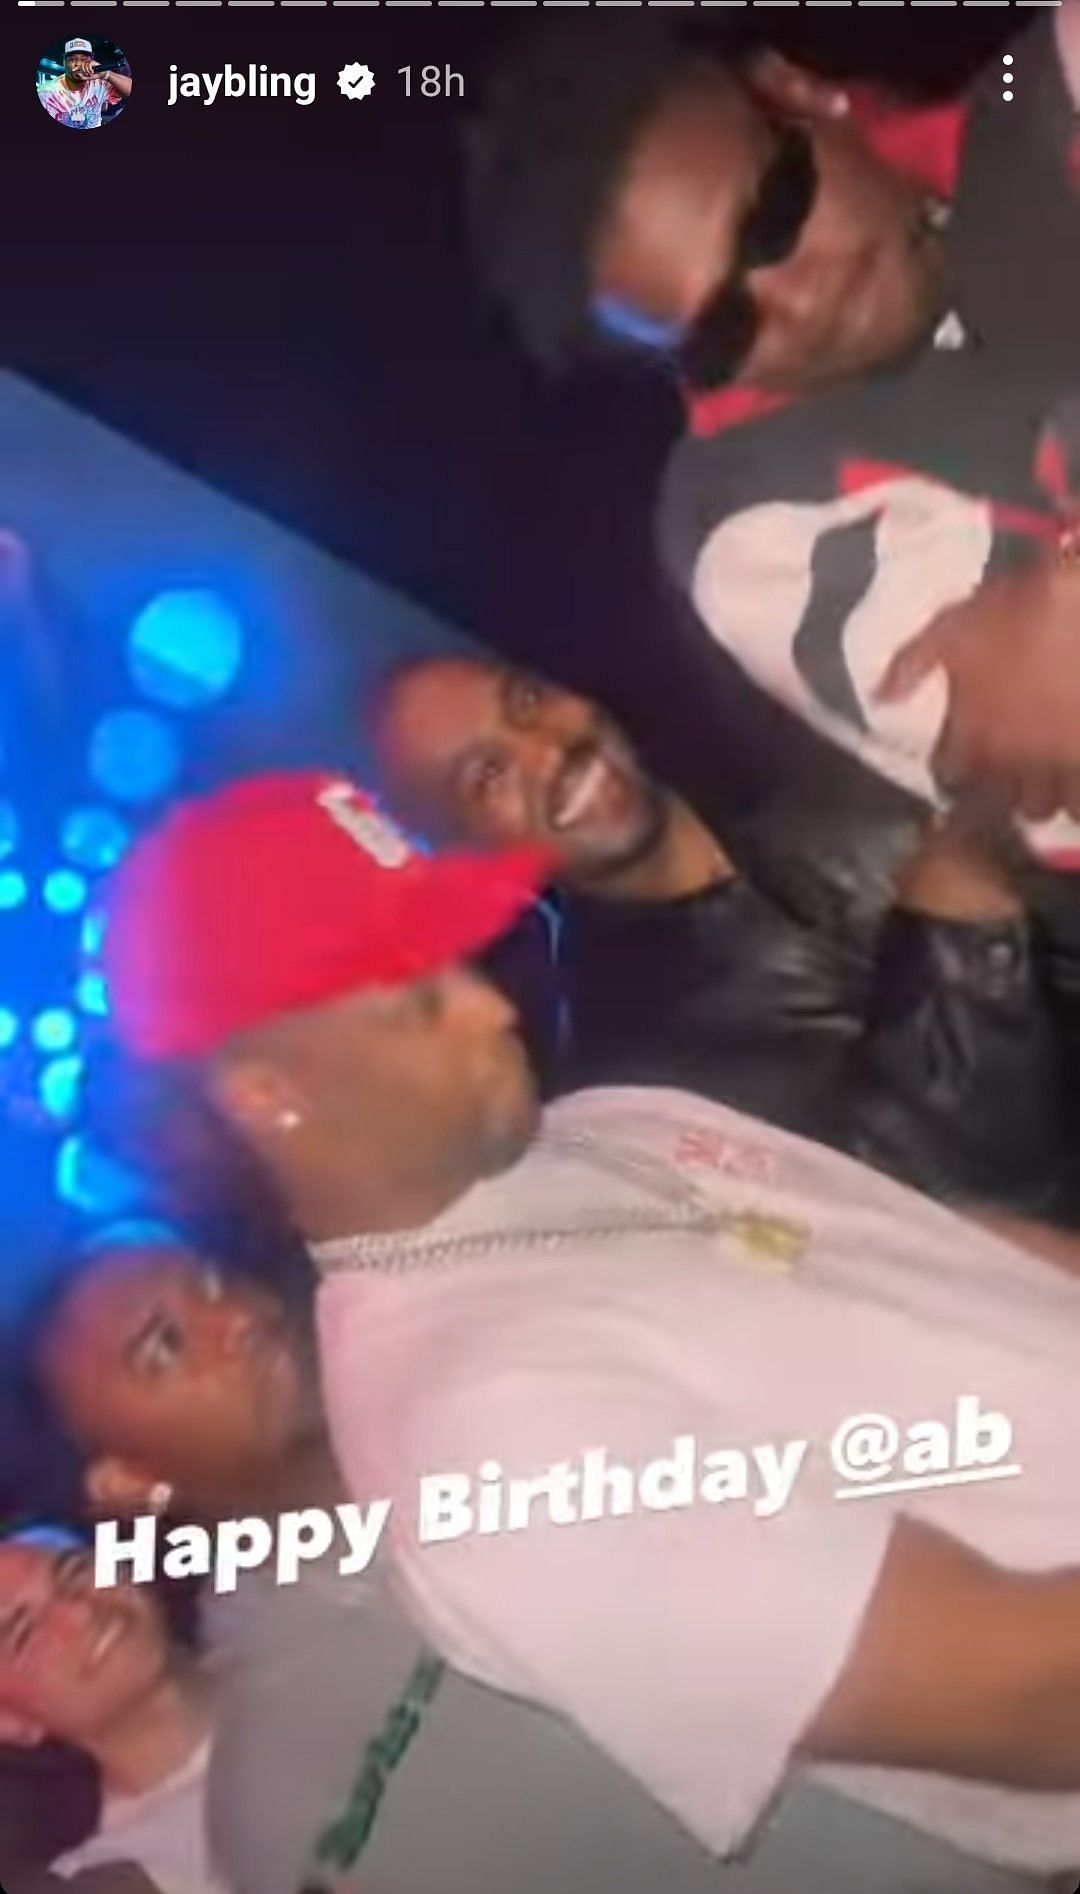 Kanye West and Antonio Brown at the party